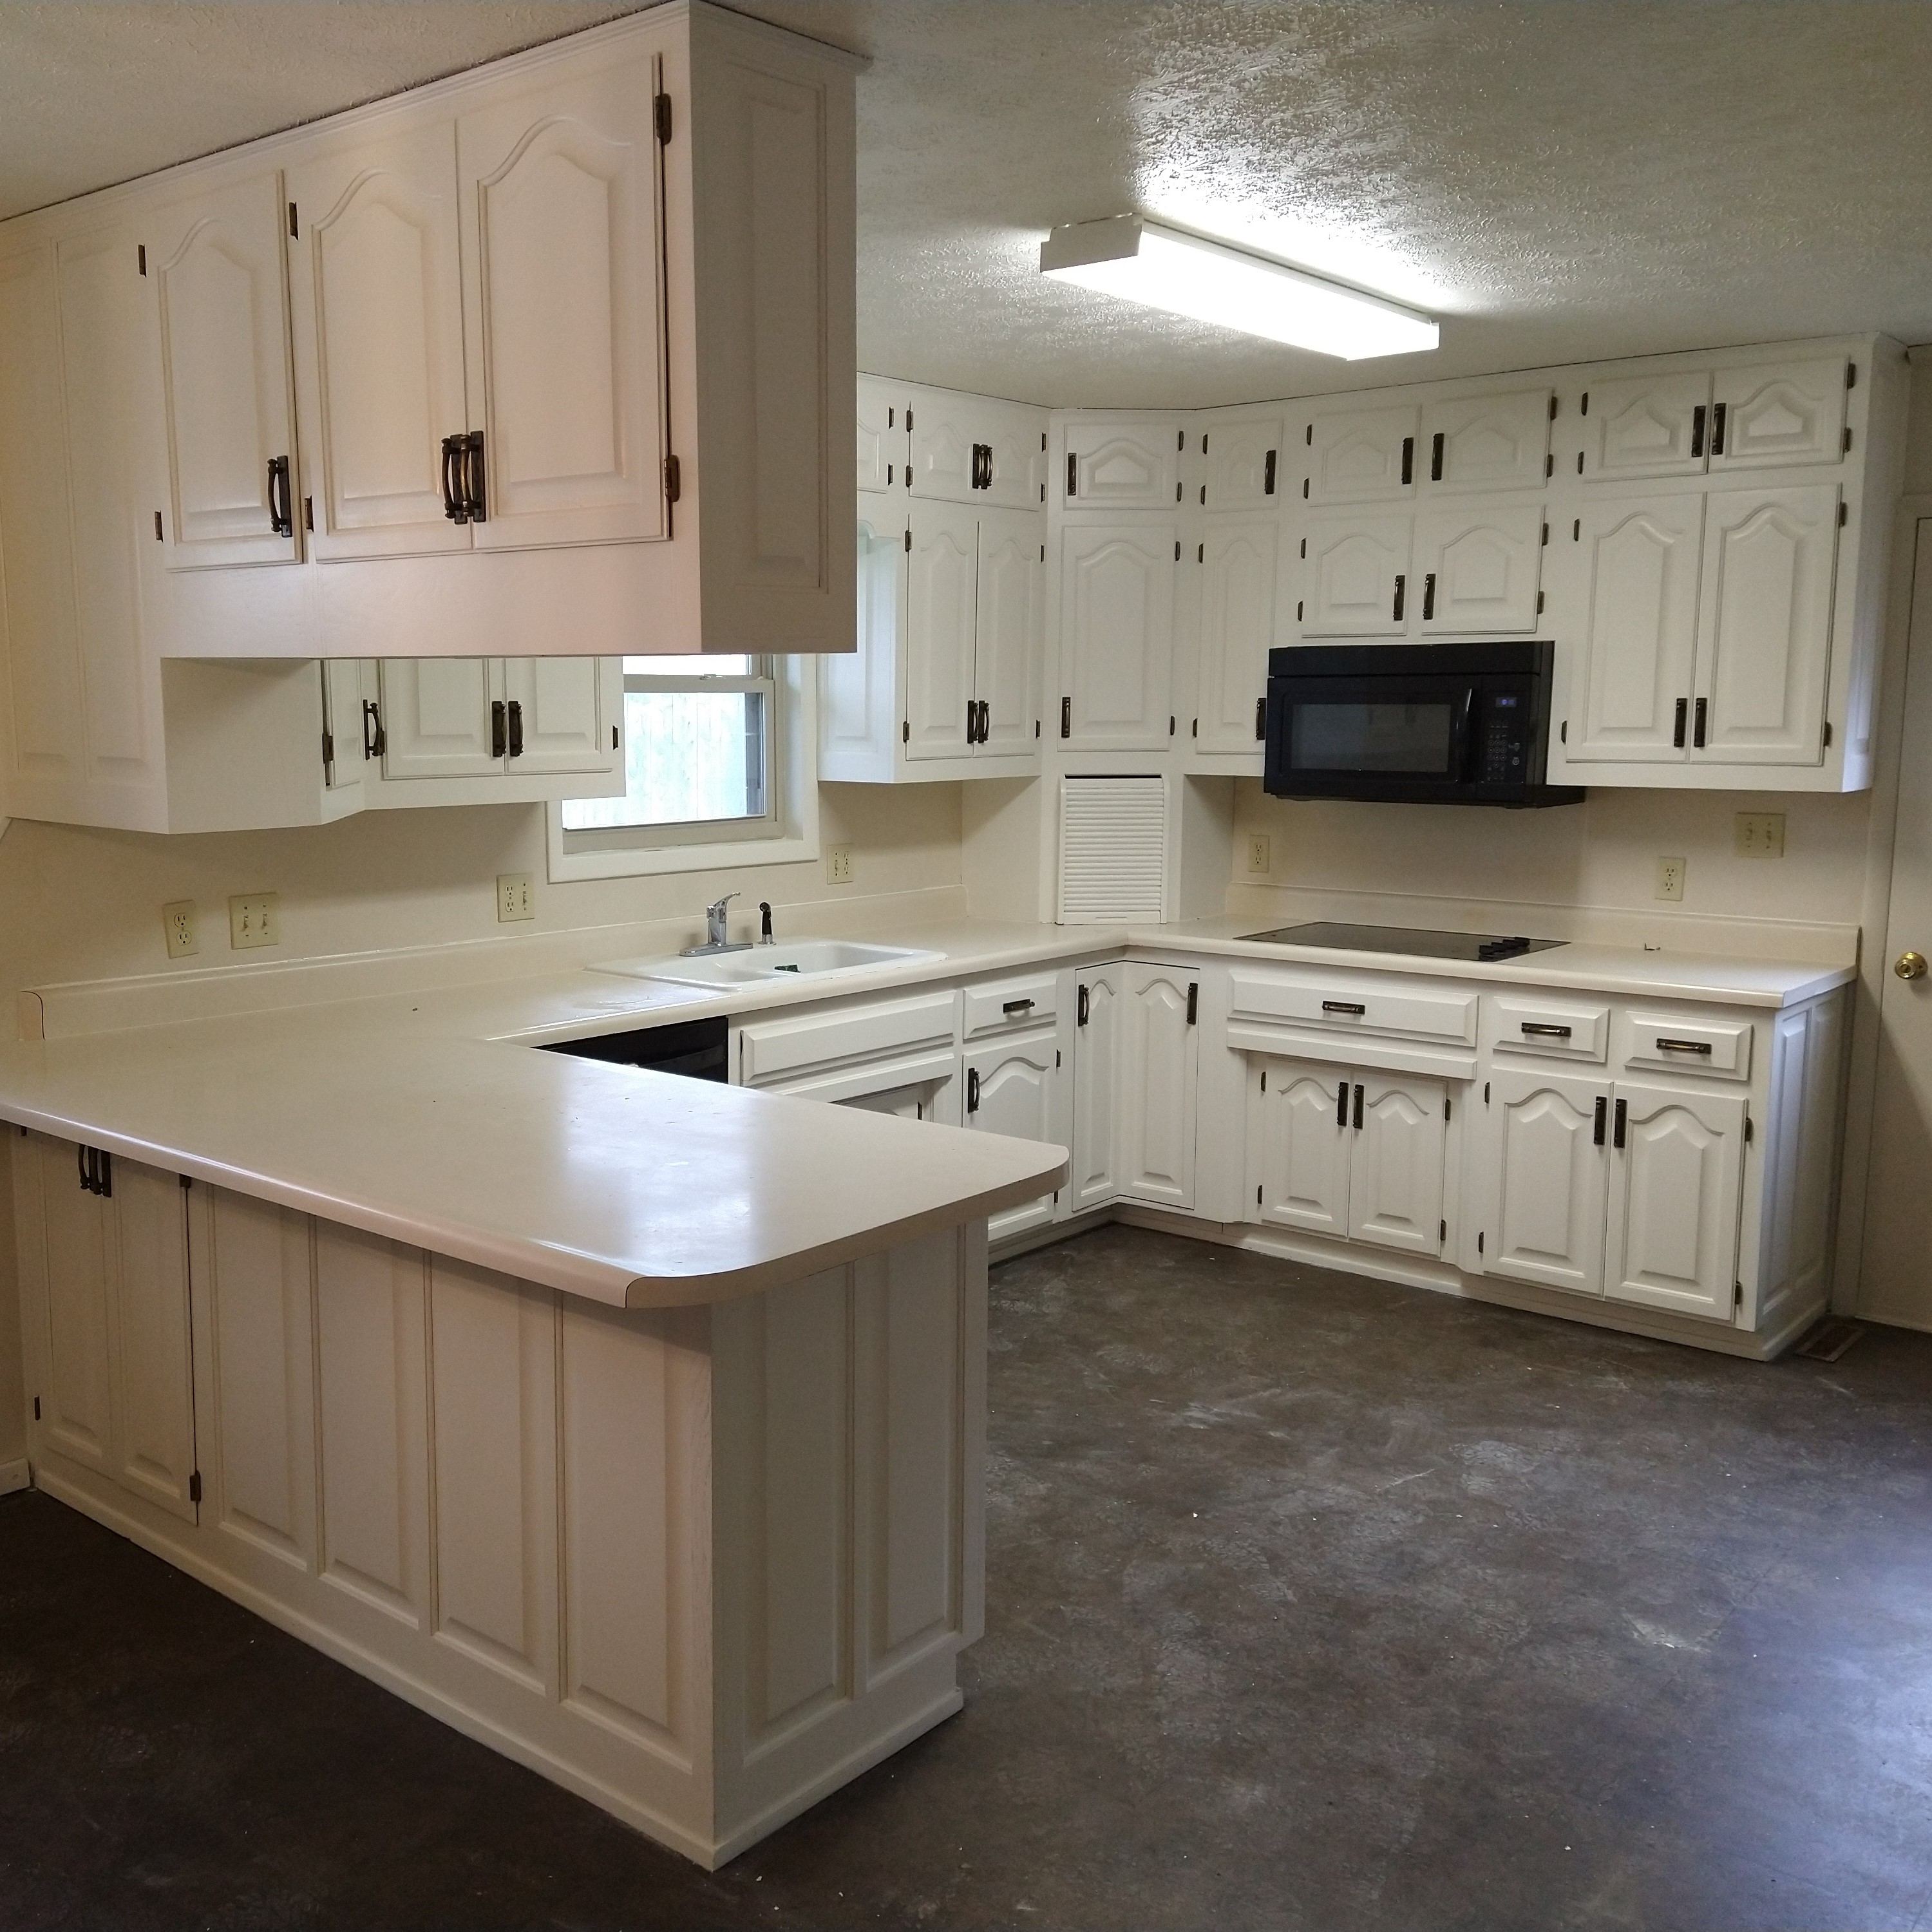 Ivory Kitchen Cabinets In Satin Finish